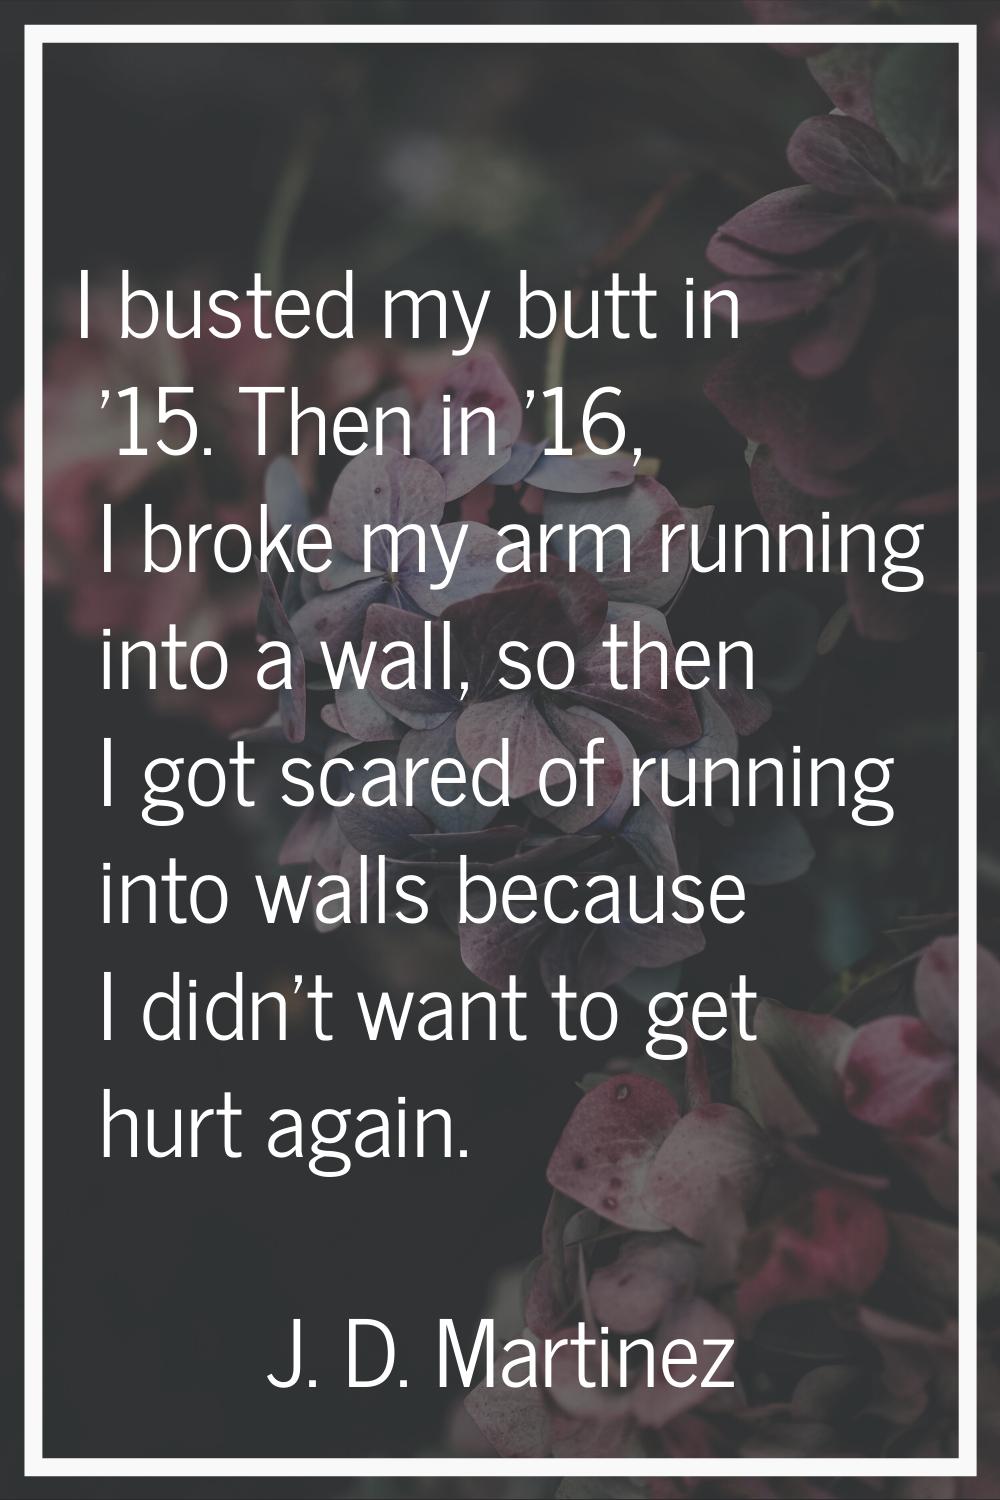 I busted my butt in '15. Then in '16, I broke my arm running into a wall, so then I got scared of r